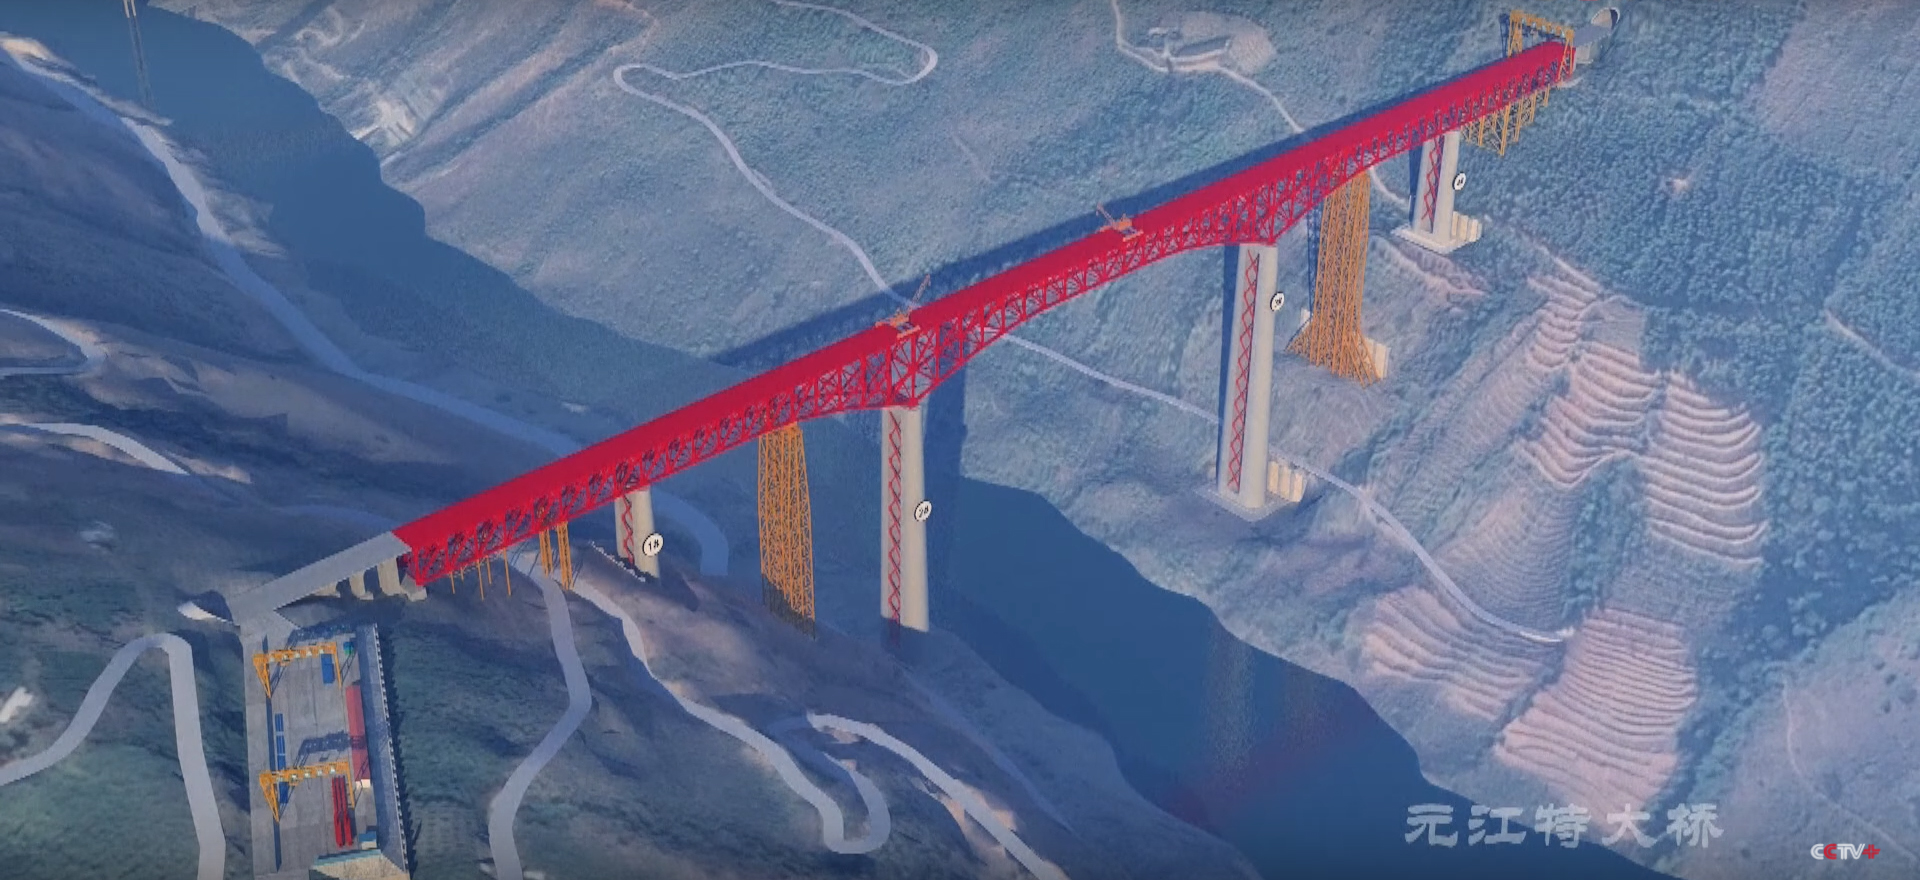 Construction starts on Chinese rail bridge with 154m-tall towers image